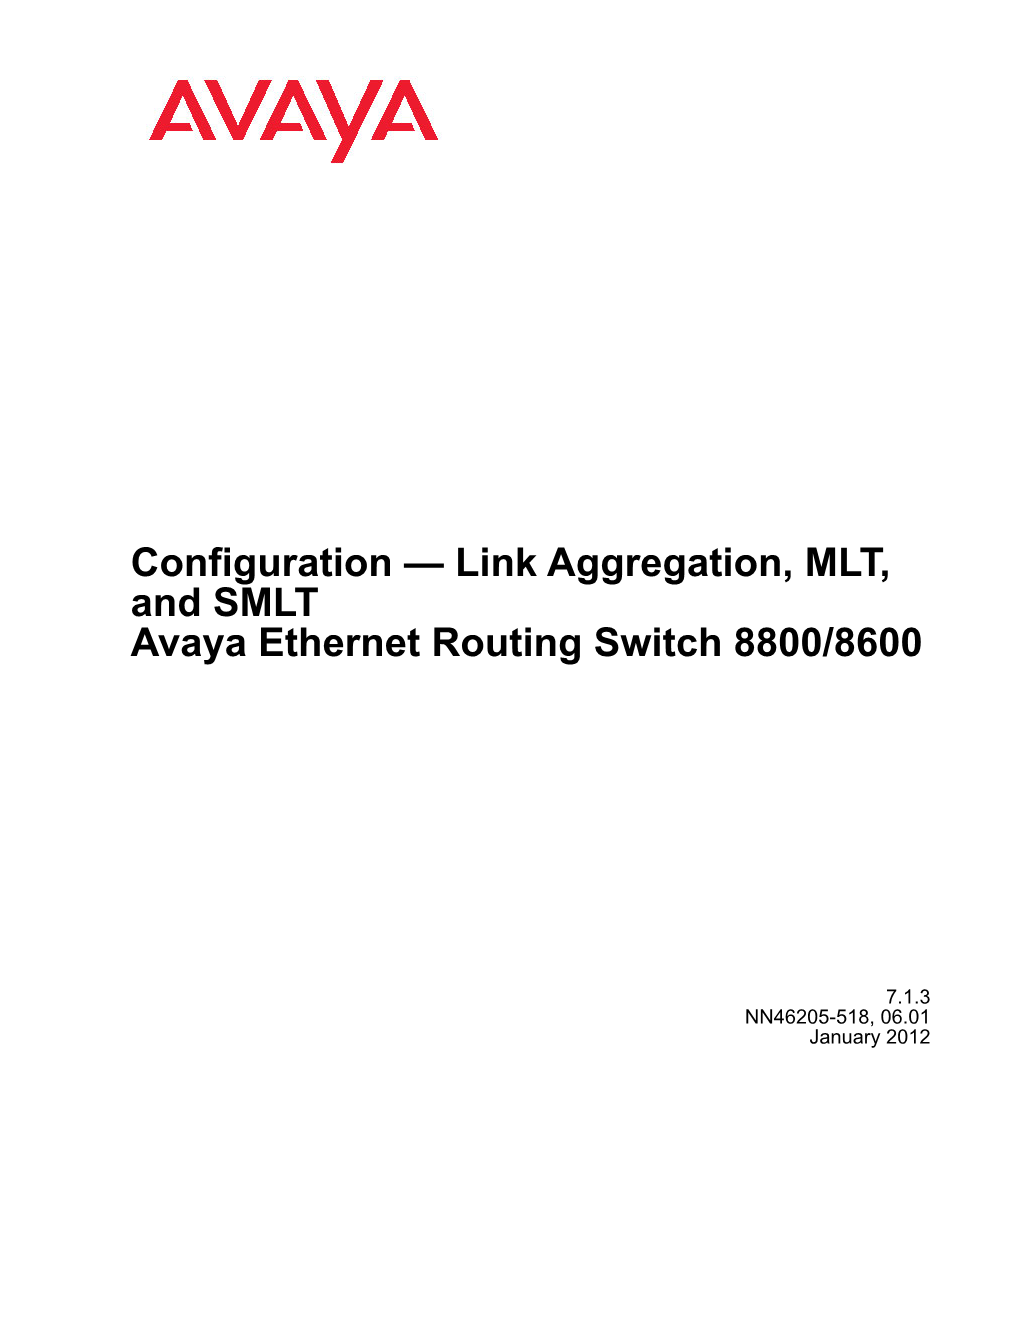 Configuration — Link Aggregation, MLT, and SMLT Avaya Ethernet Routing Switch 8800/8600